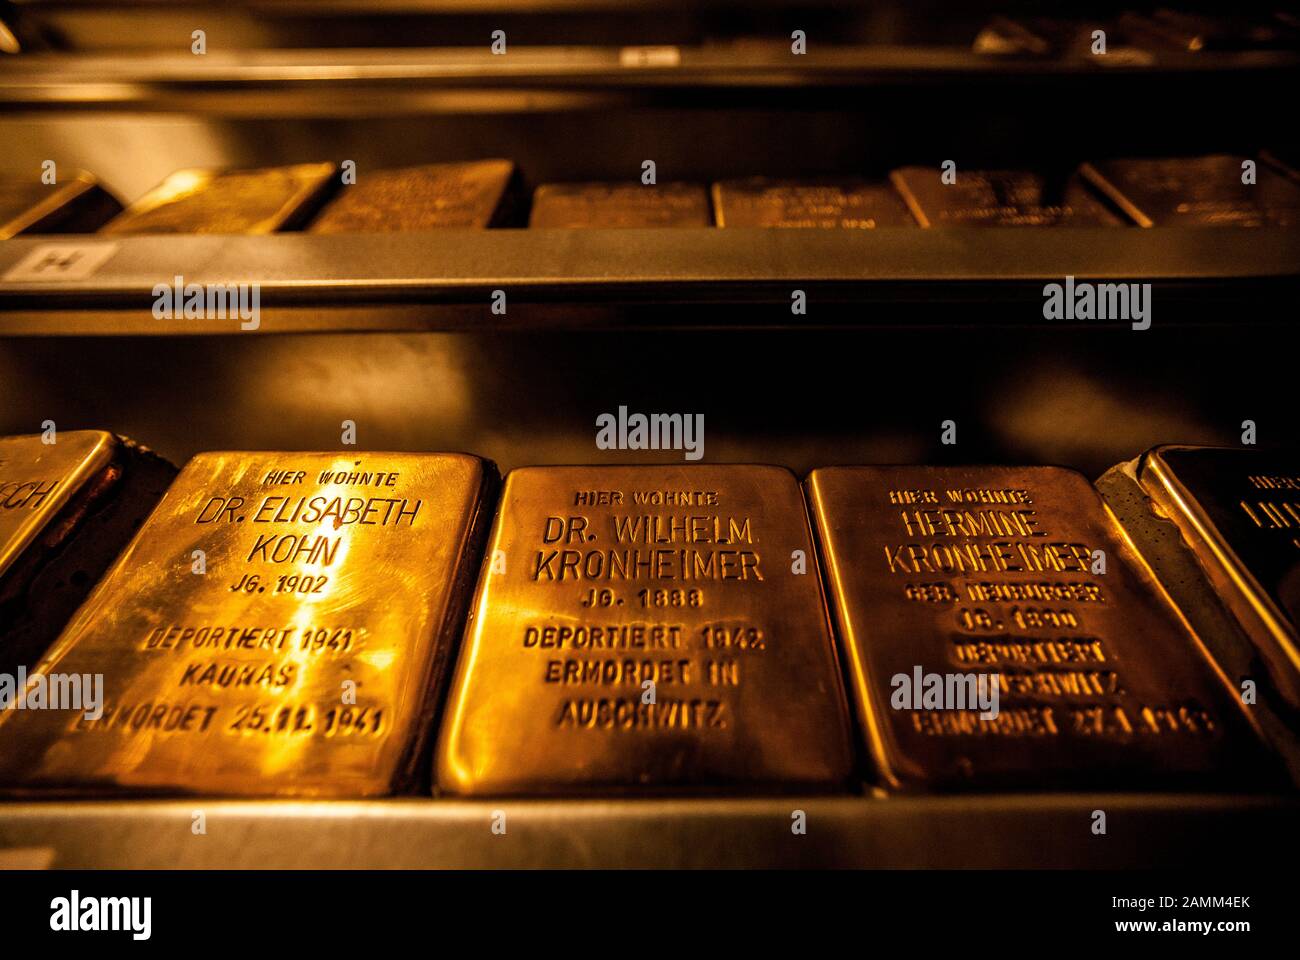 In a cellar in Barer Straße, prepared stumbling blocks are stored, which may not be laid on public ground due to the prohibition in Munich. [automated translation] Stock Photo